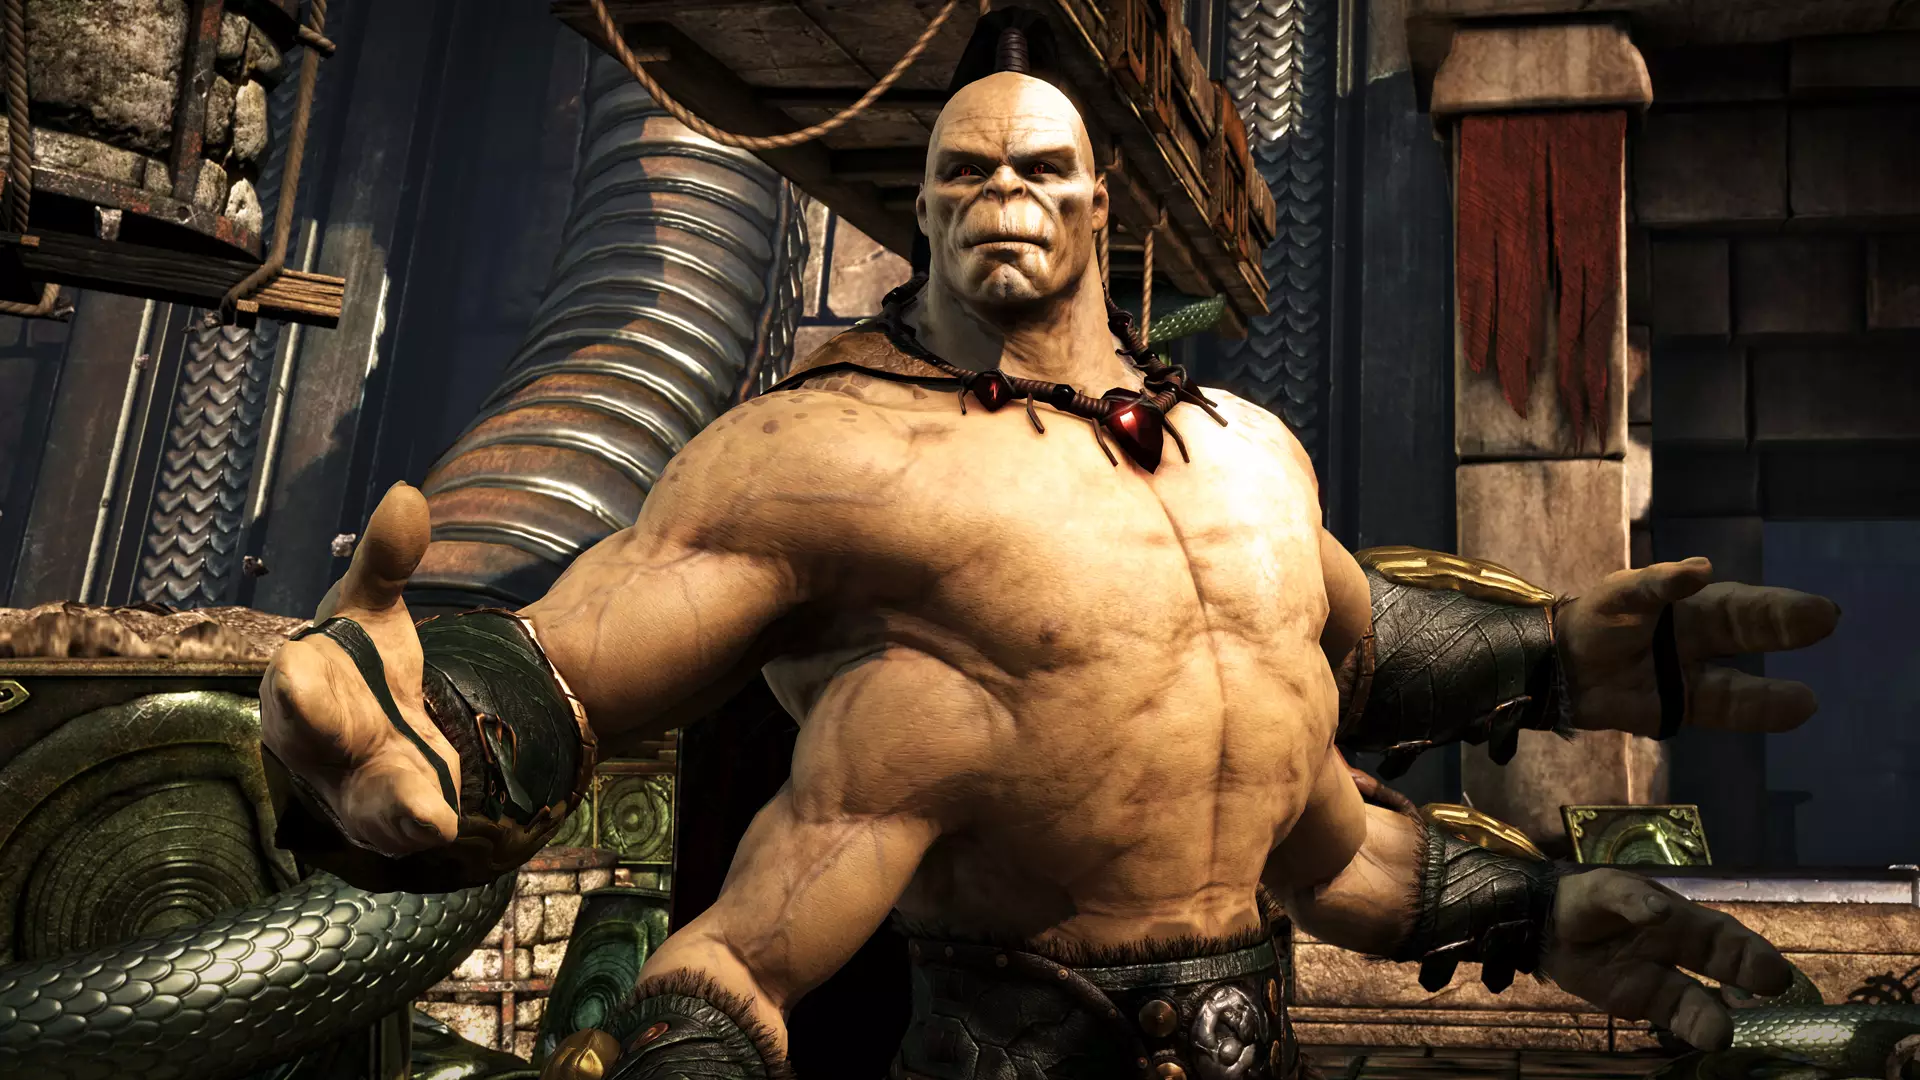 Goro, seen here in Mortal Kombat X, is a series mainstay, also appearing in the movie /